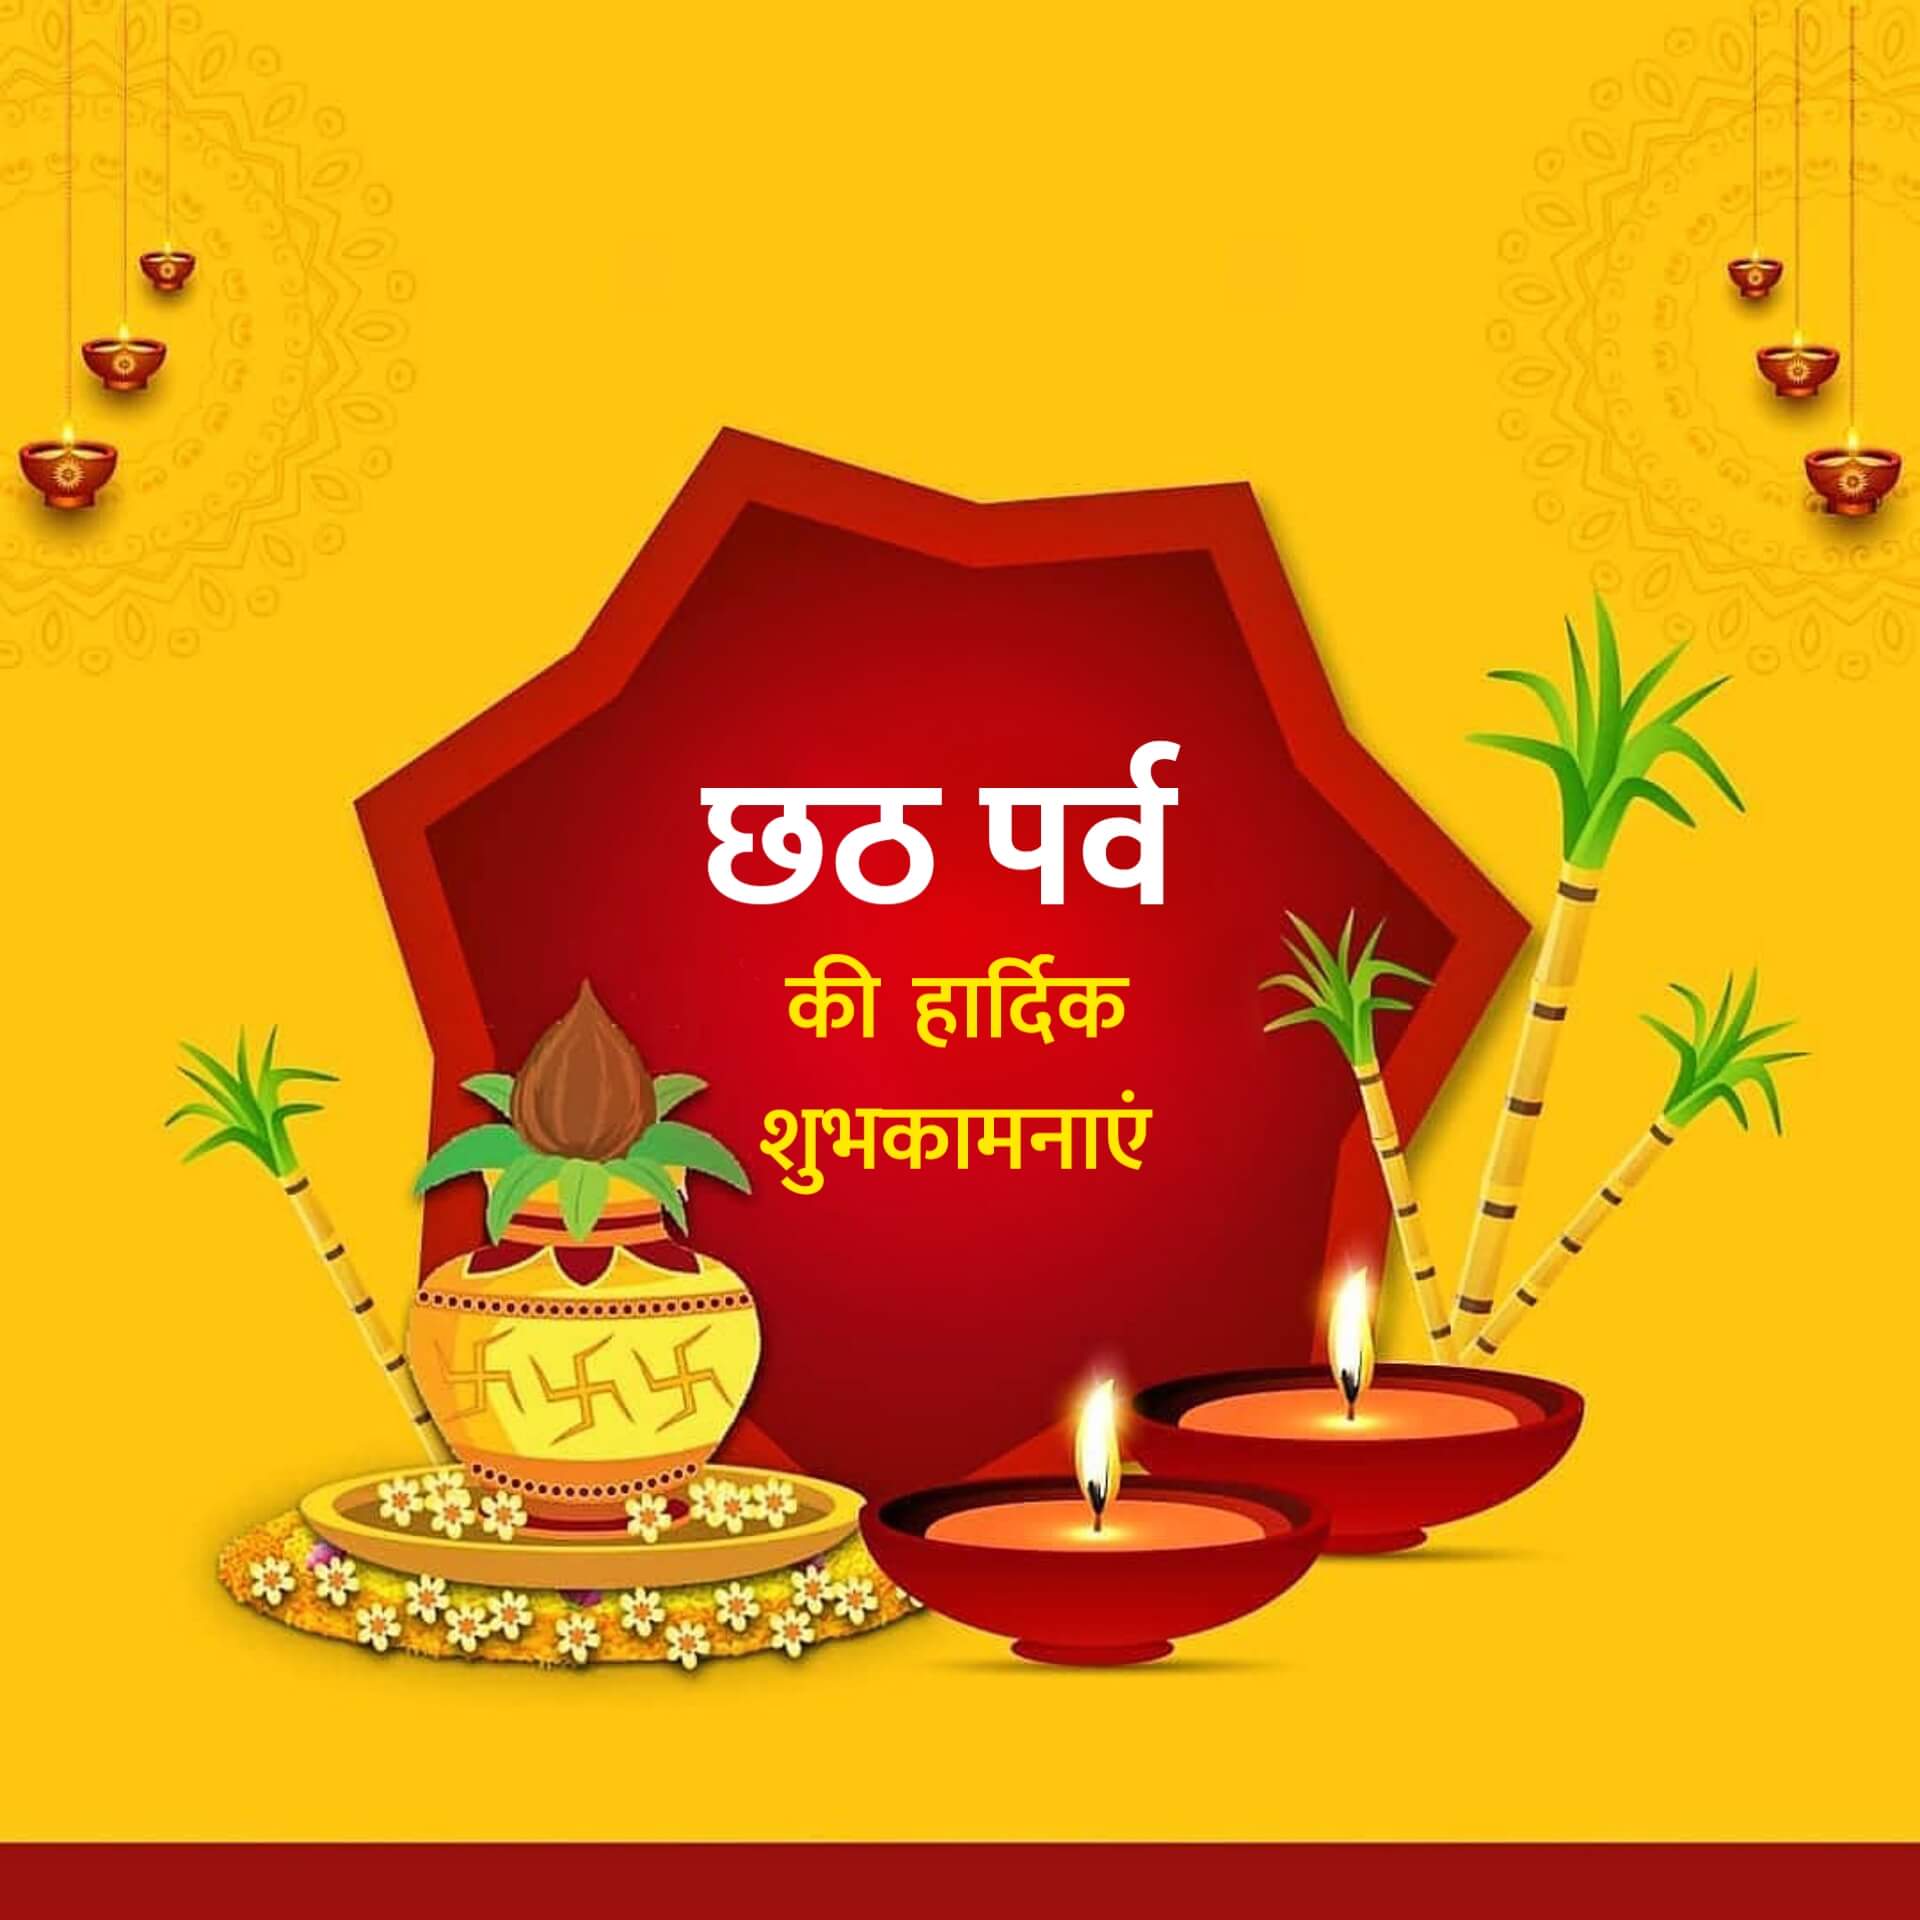 34+ BEST Happy Chhath Puja Image, Photos, Pictures & Wishes